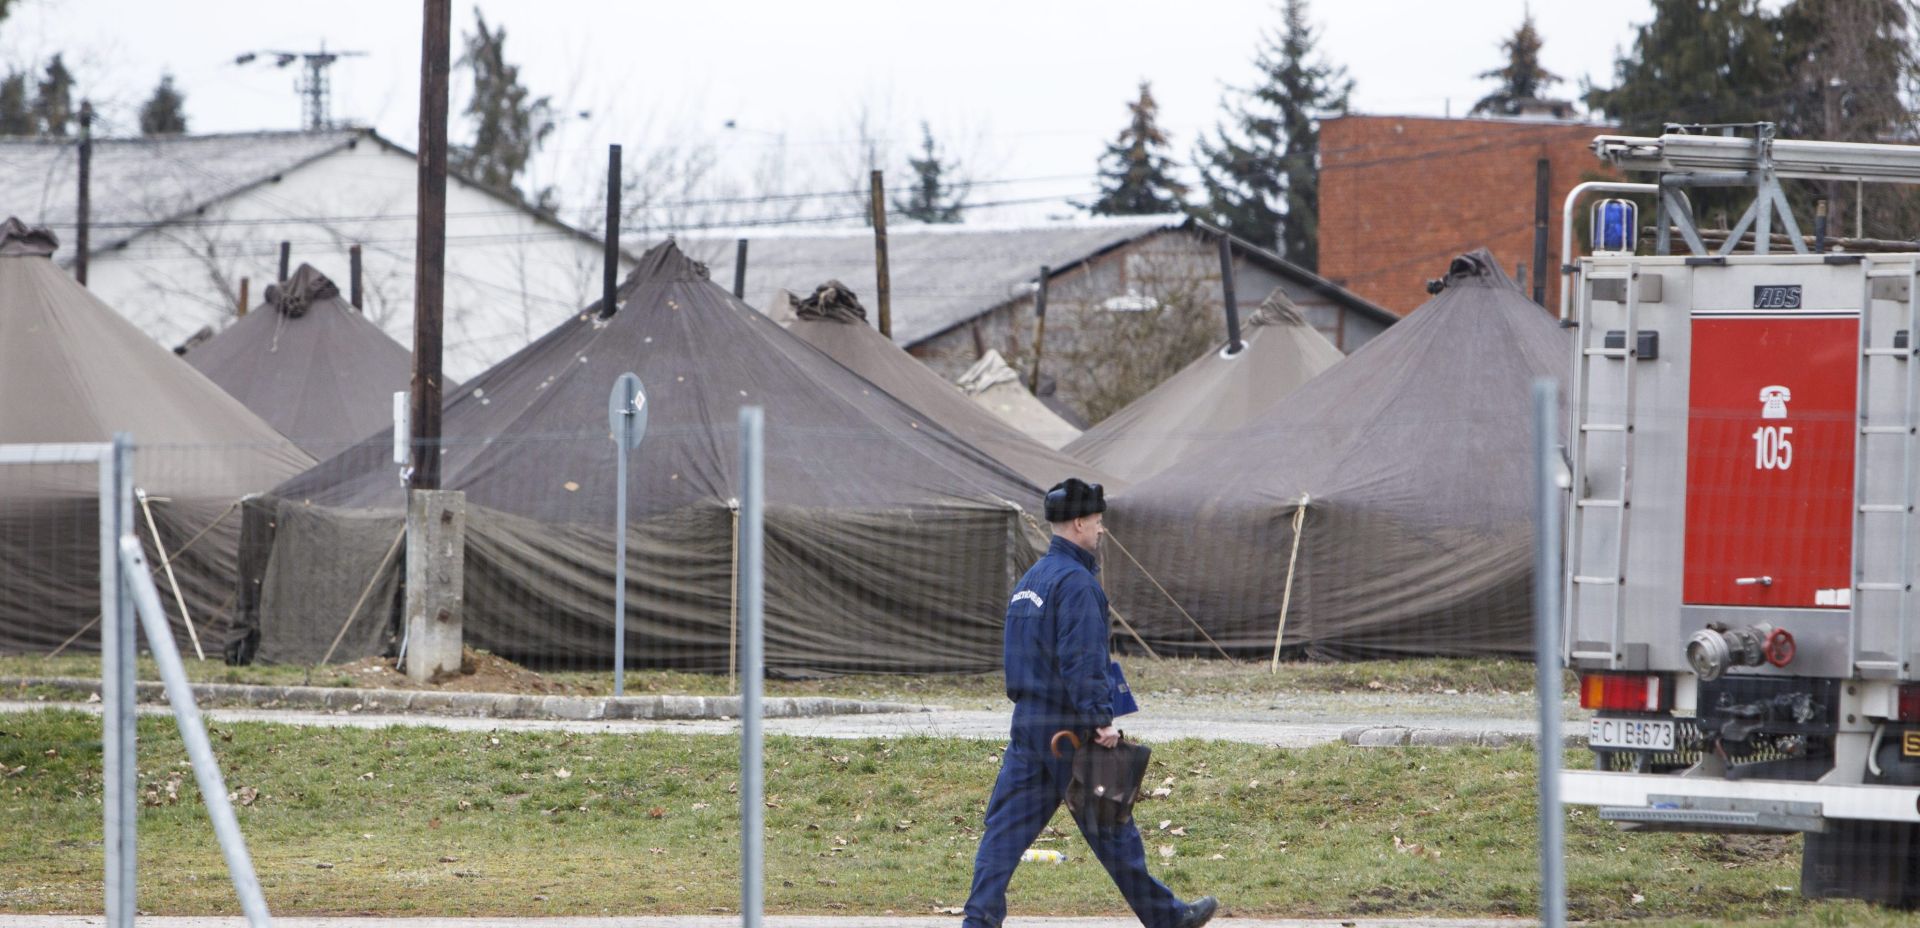 epa05188974 A policeman walks past tents of a reception centre for migrants and refugees in Kormend, 233 kms southwest of Budapest, Hungary, 01 March 2016. This day the Hungarian authorities have commenced the construction of the temporary camp, which will serve to accommodate about three hundred people.  EPA/GYORGY VARGA HUNGARY OUT